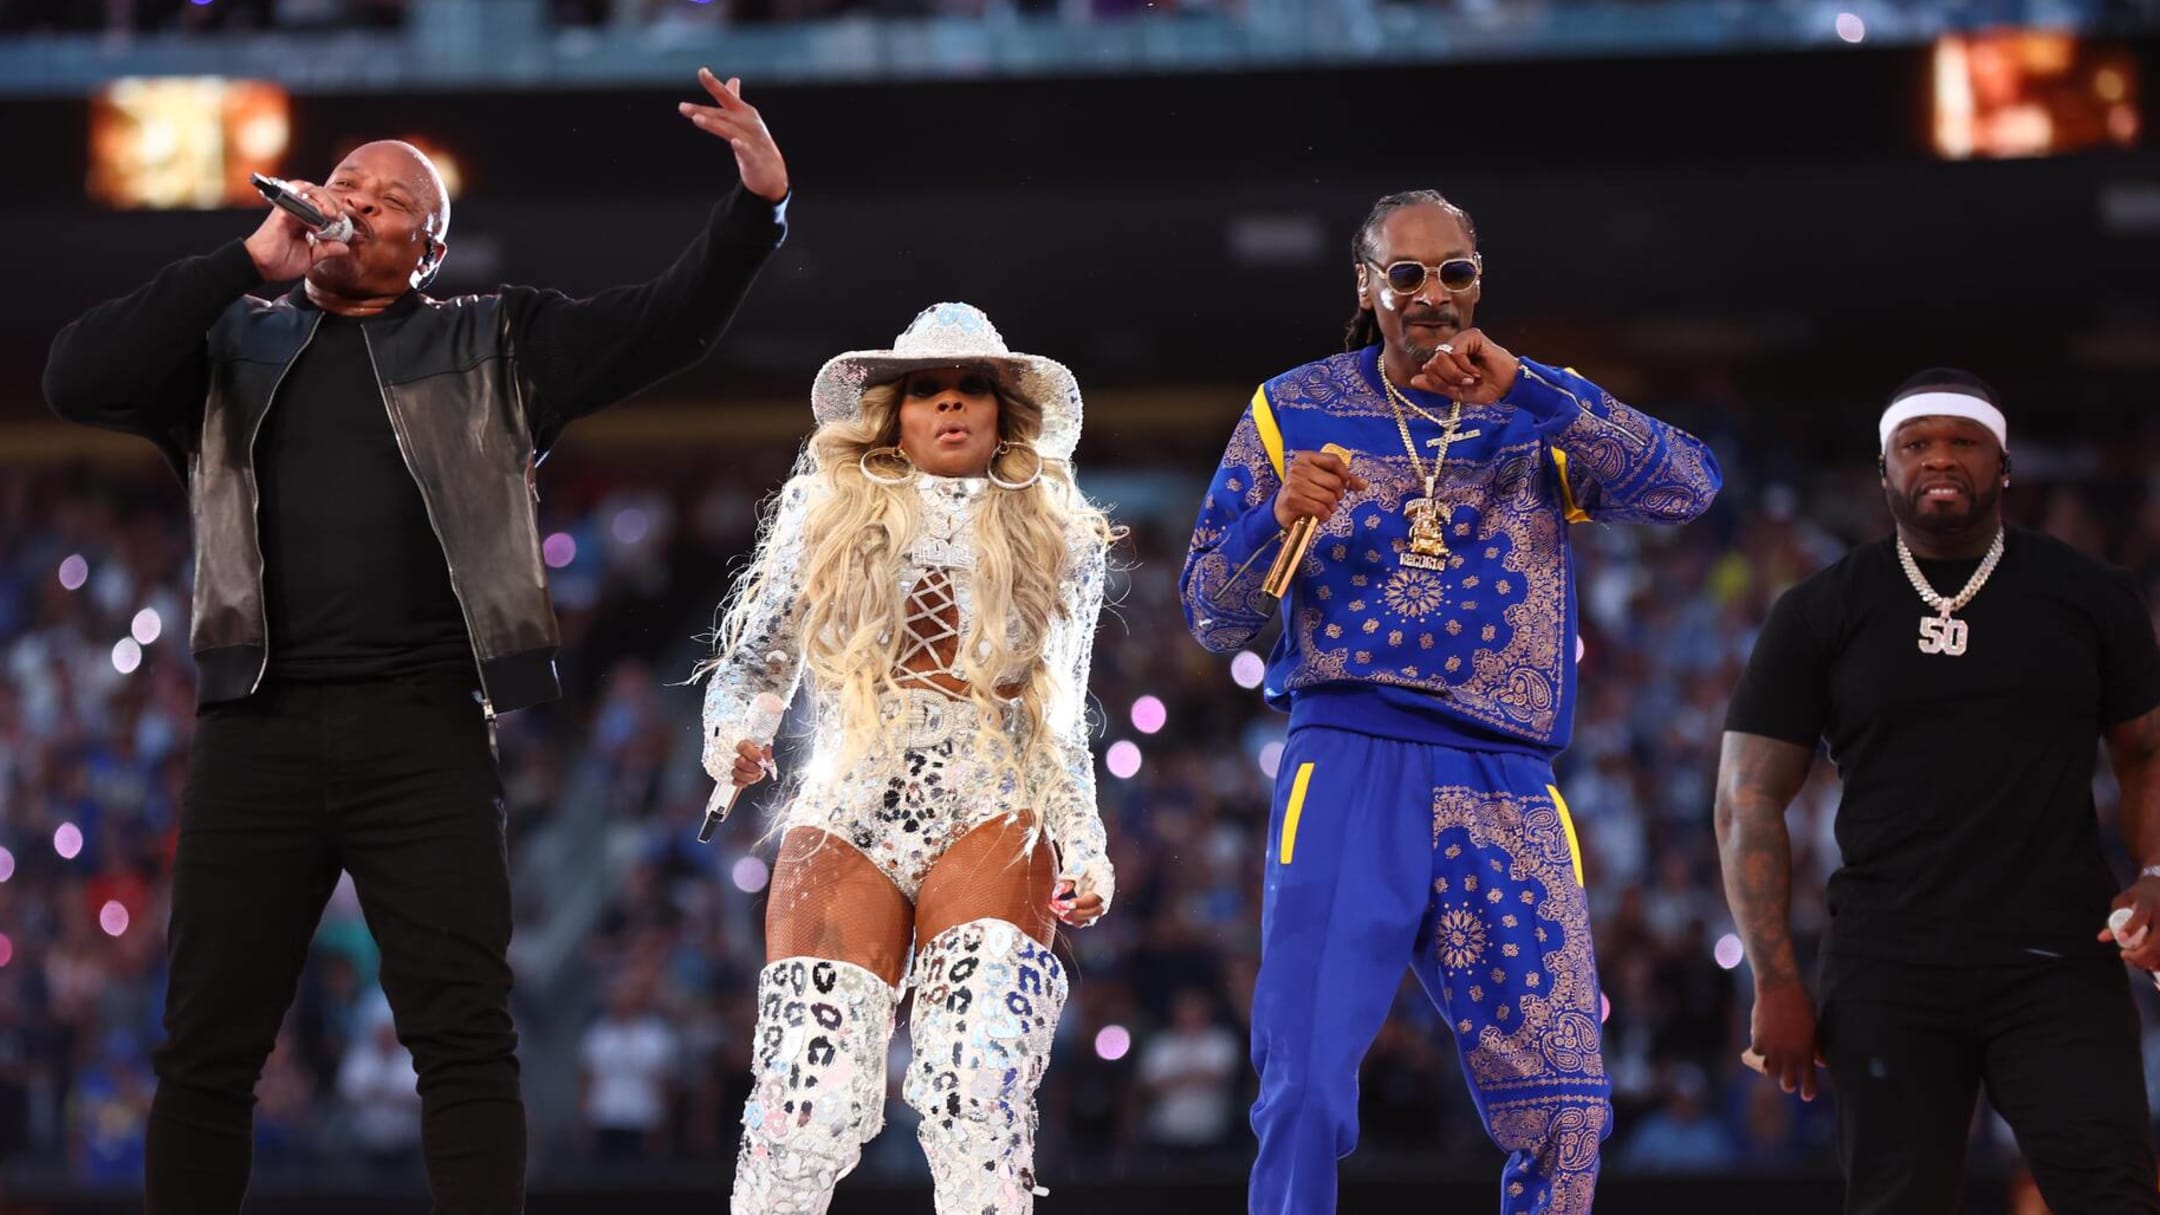 NFL world reacts to epic Super Bowl halftime show